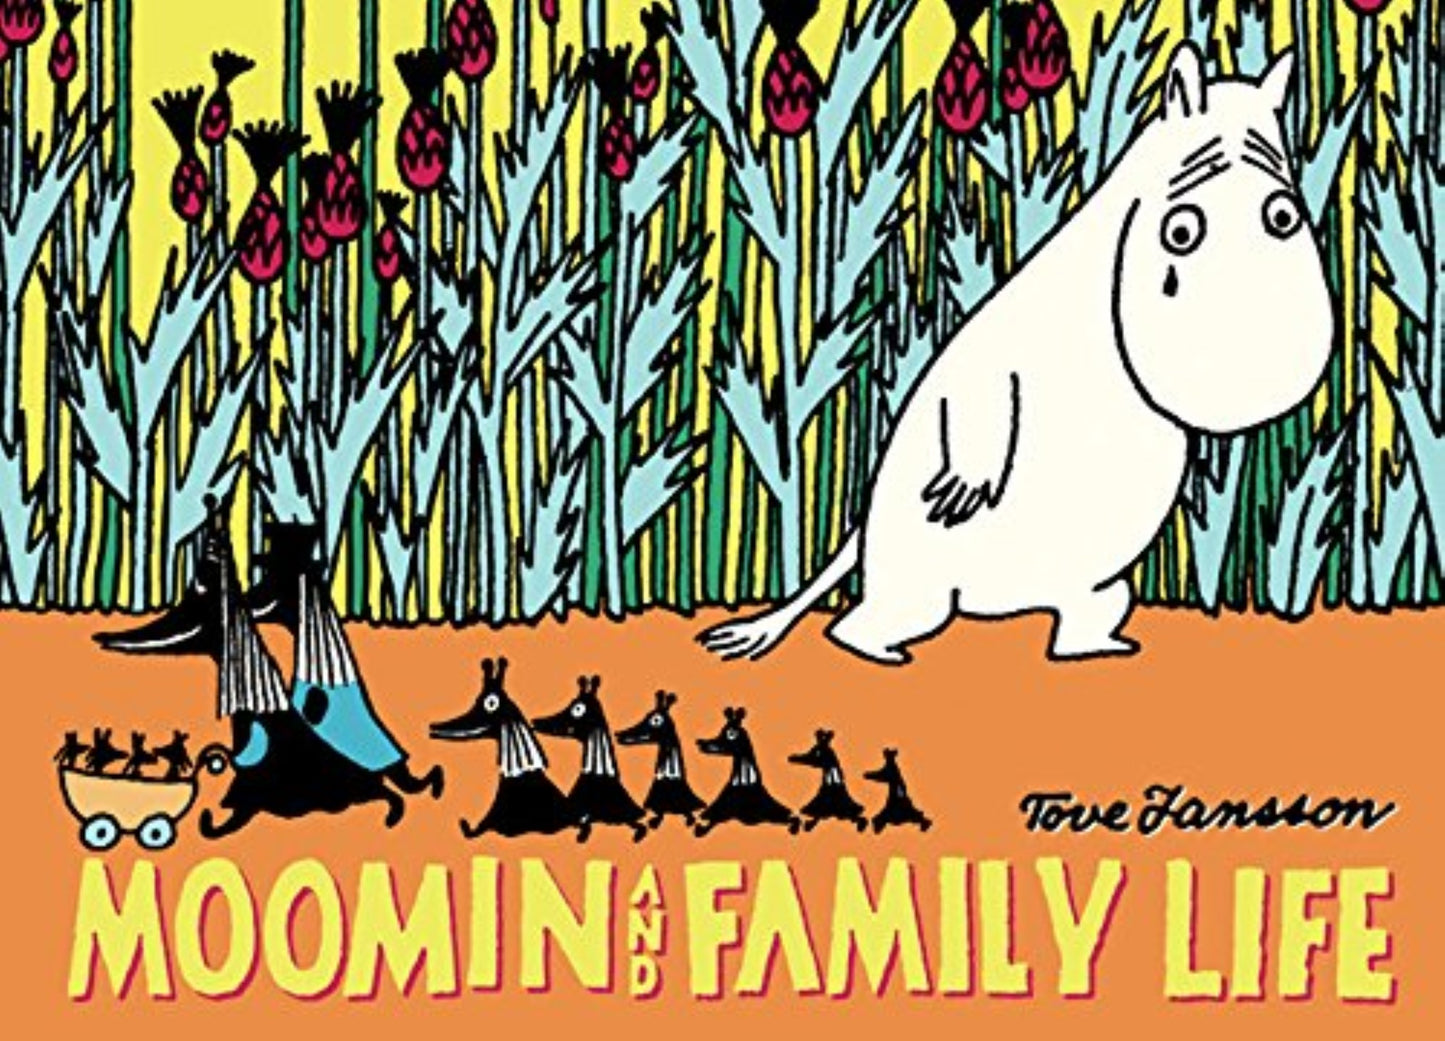 Moomin and Family Life - Tove Jansson